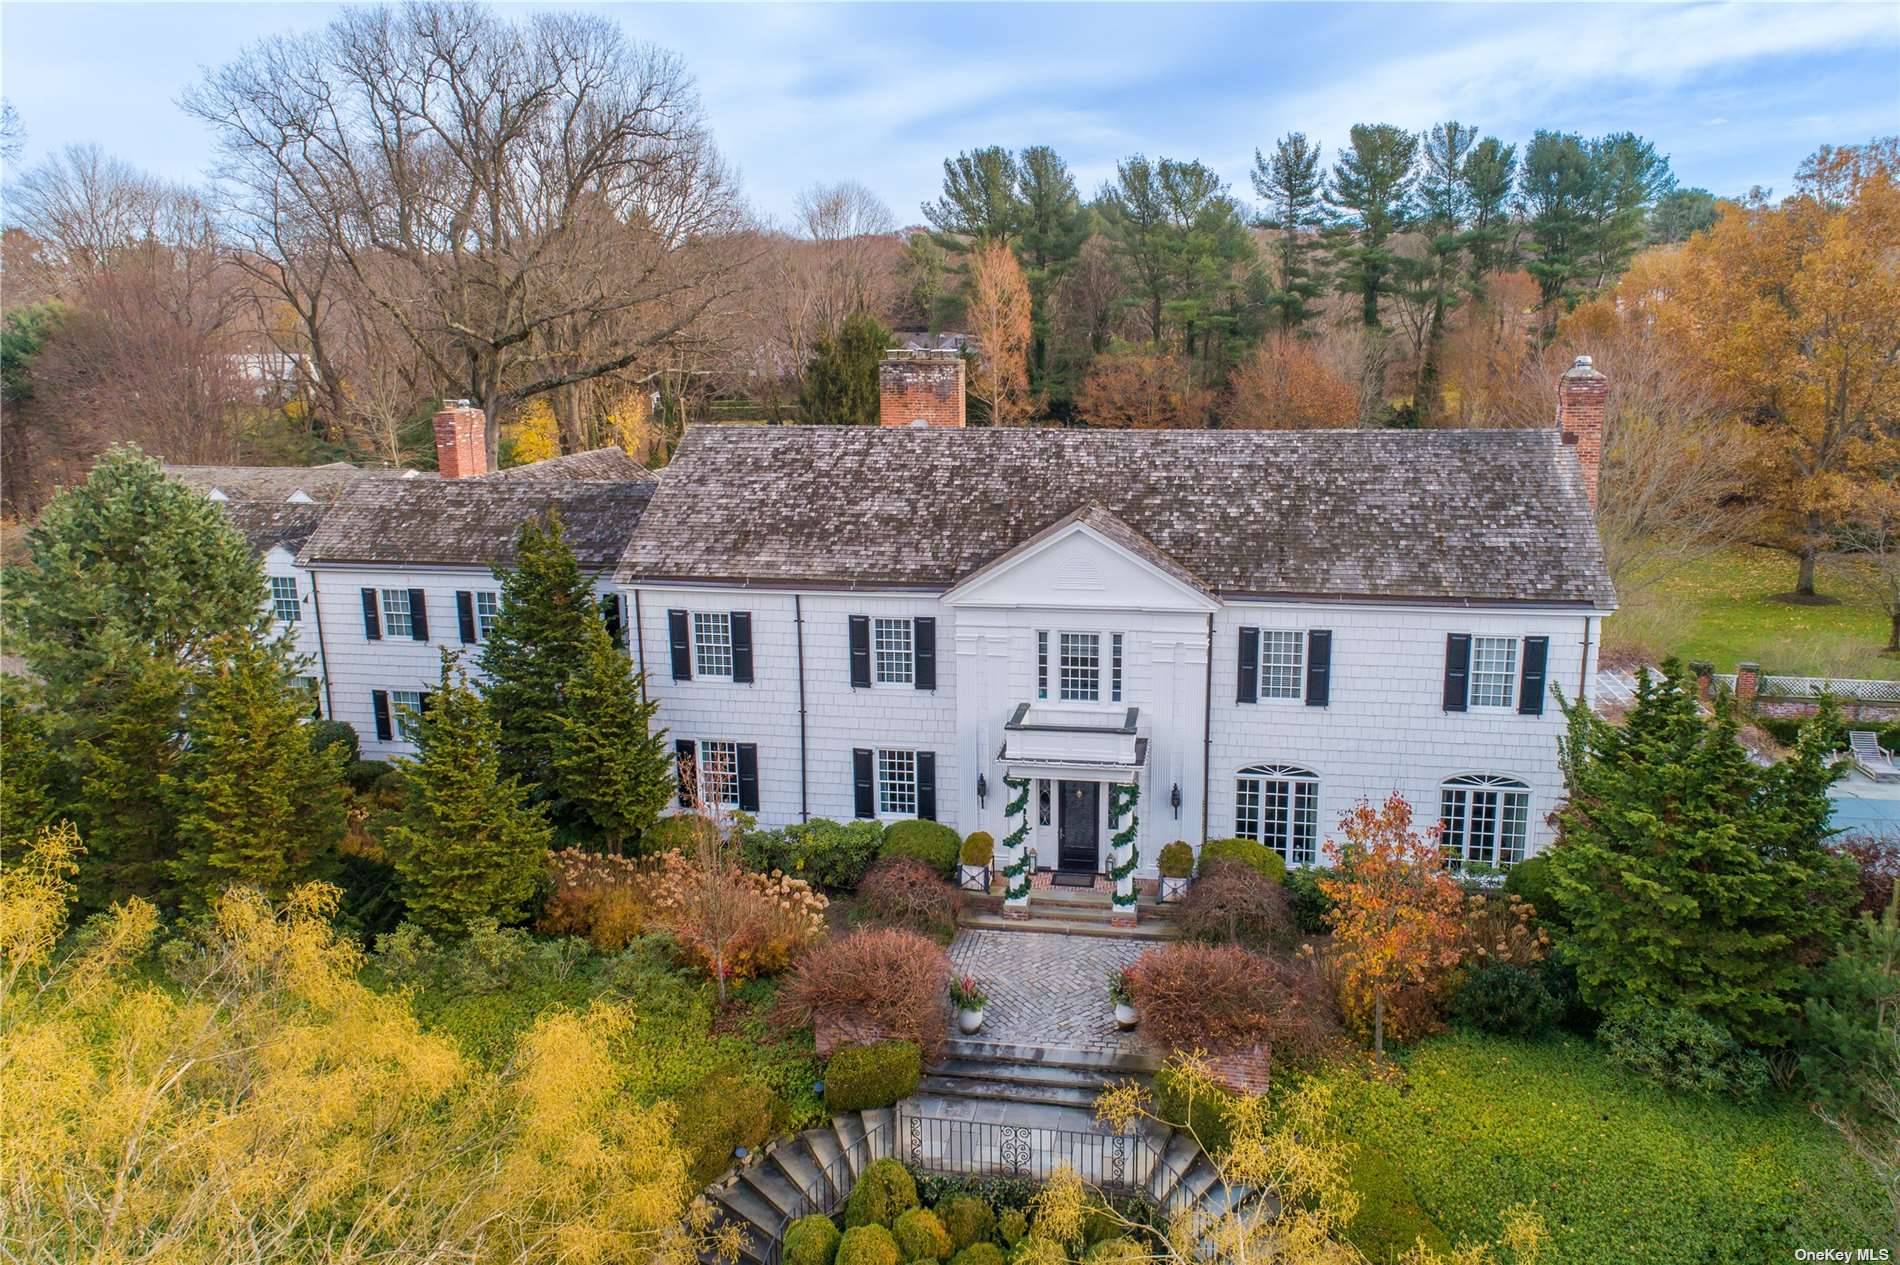 Nestled on a sprawling 7 acres of lush, landscaped land in the picturesque Village of Matinecock, lies this majestic and timeless 1925 Colonial estate.